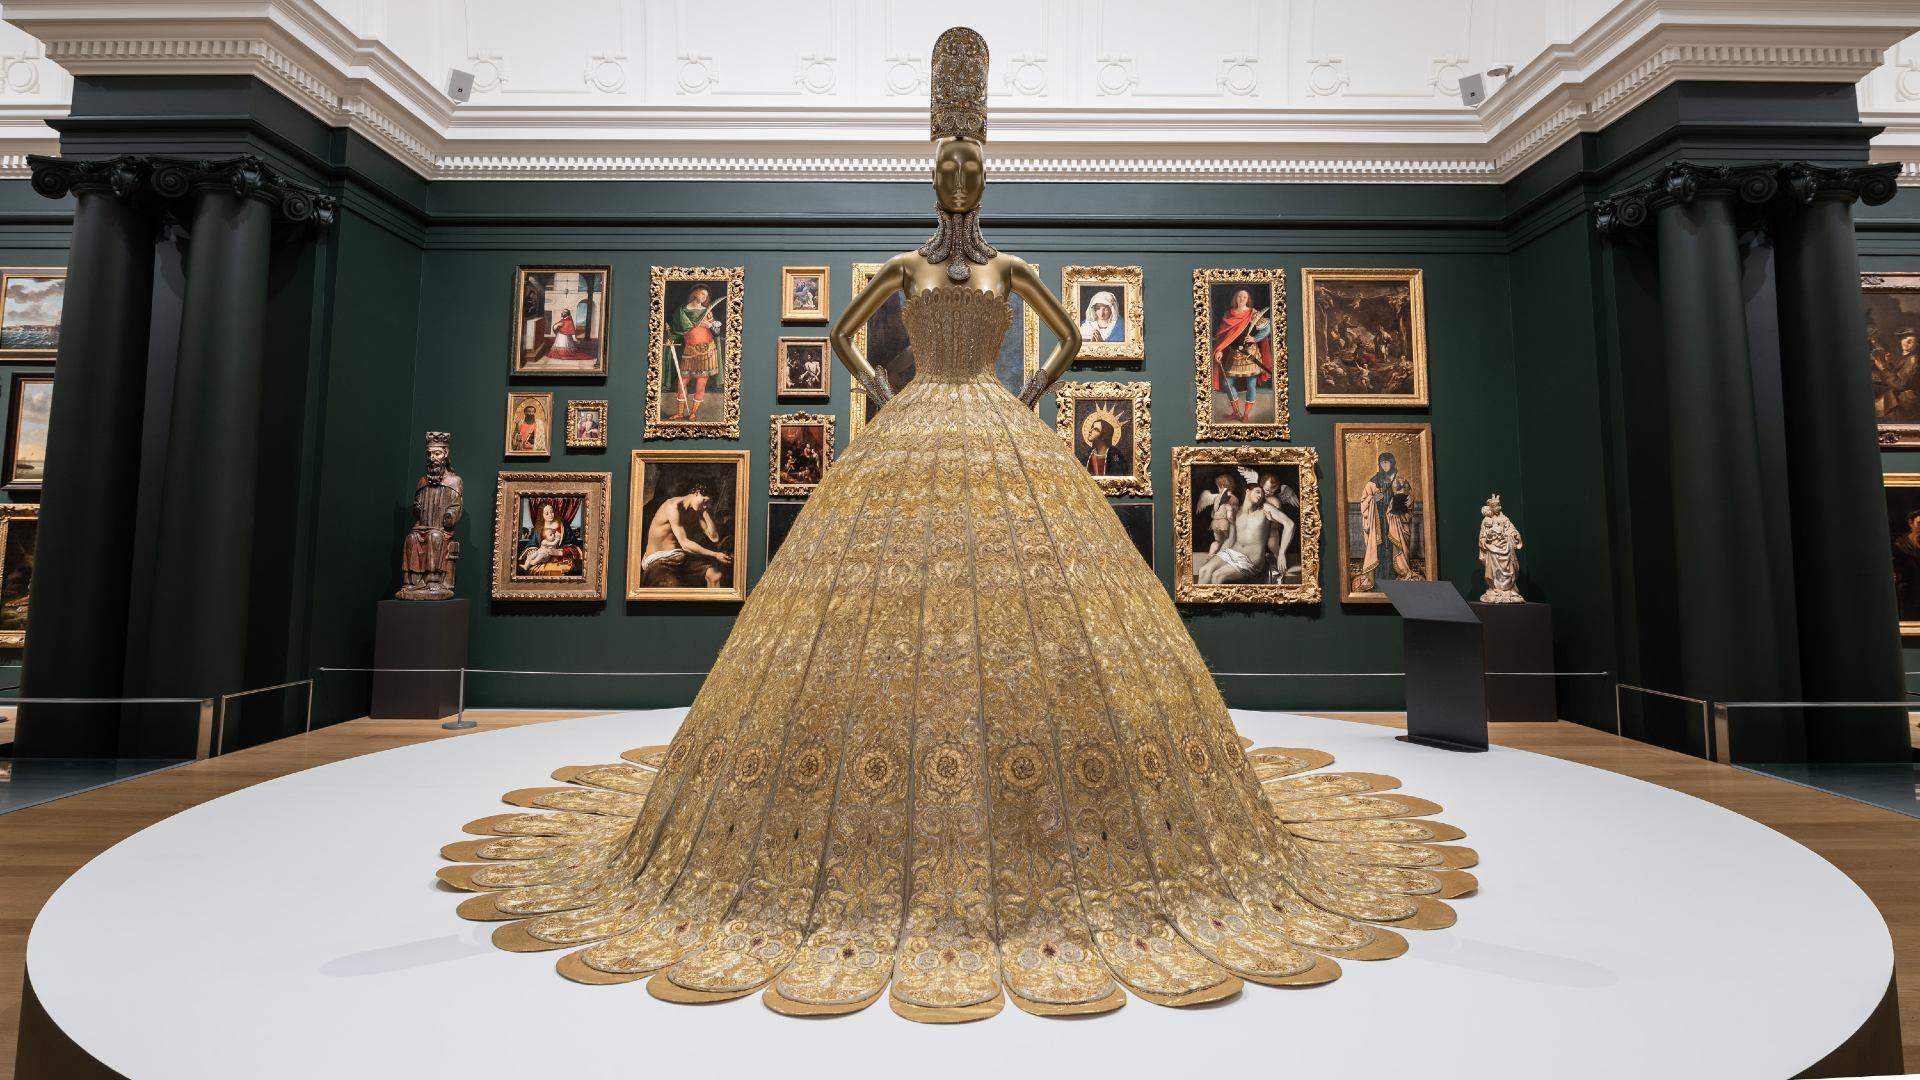 Auckland Art Gallery's Stunning New Exhibition Focuses on World-Renowned Couture Designer Guo Pei